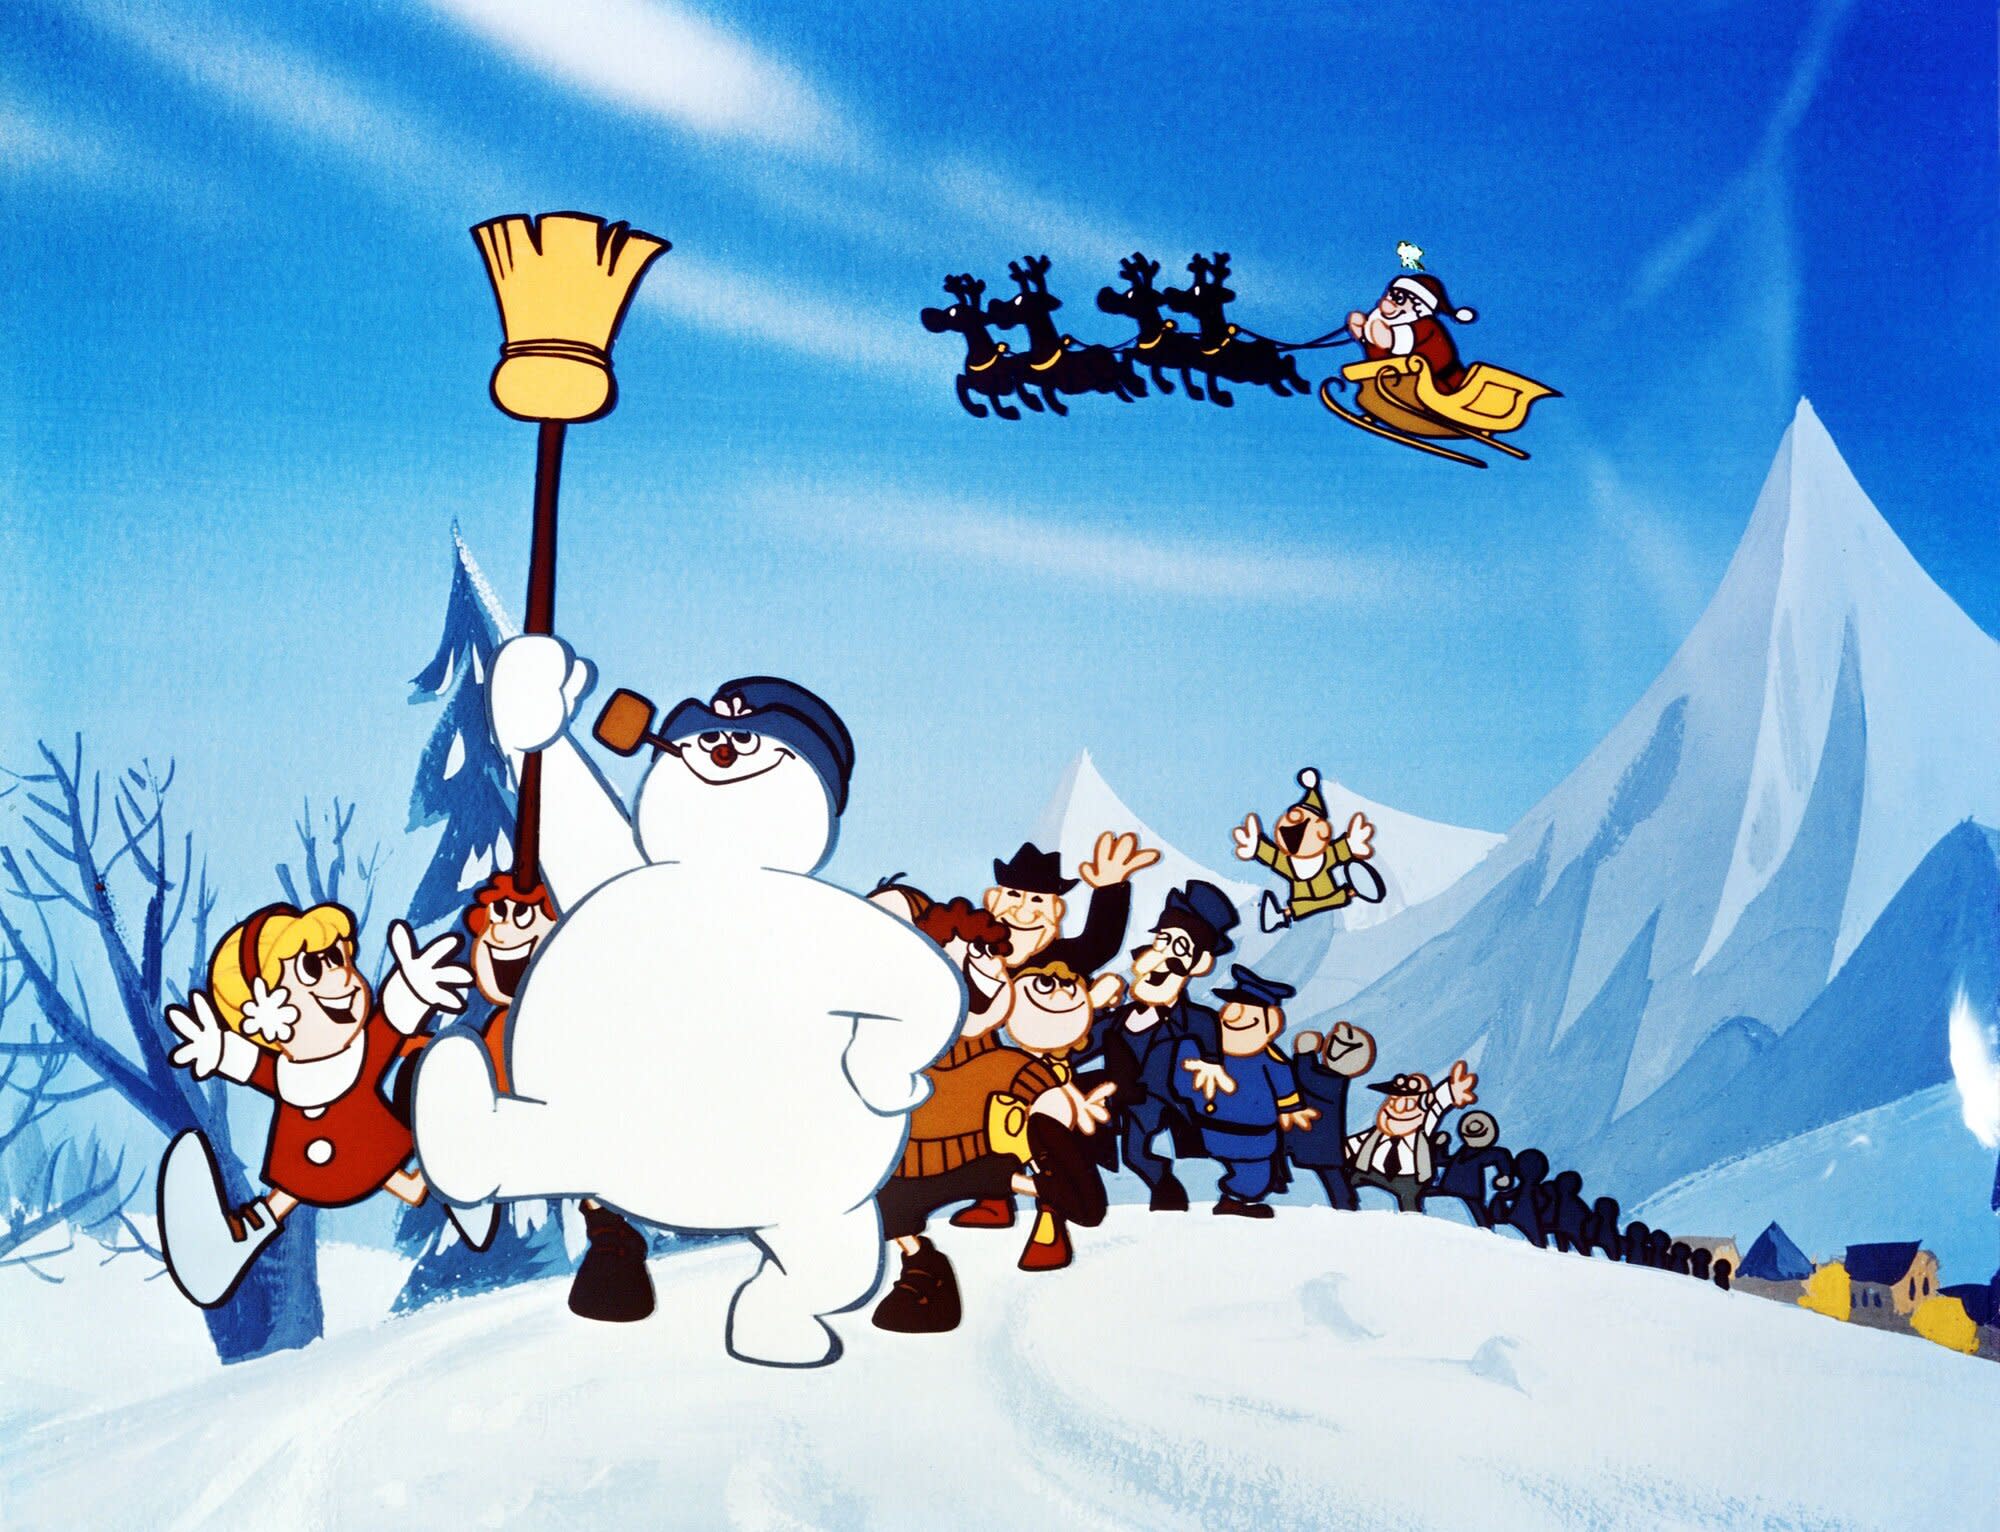 CBS Announces Christmas Specials Lineup, Including Rudolph and Frosty